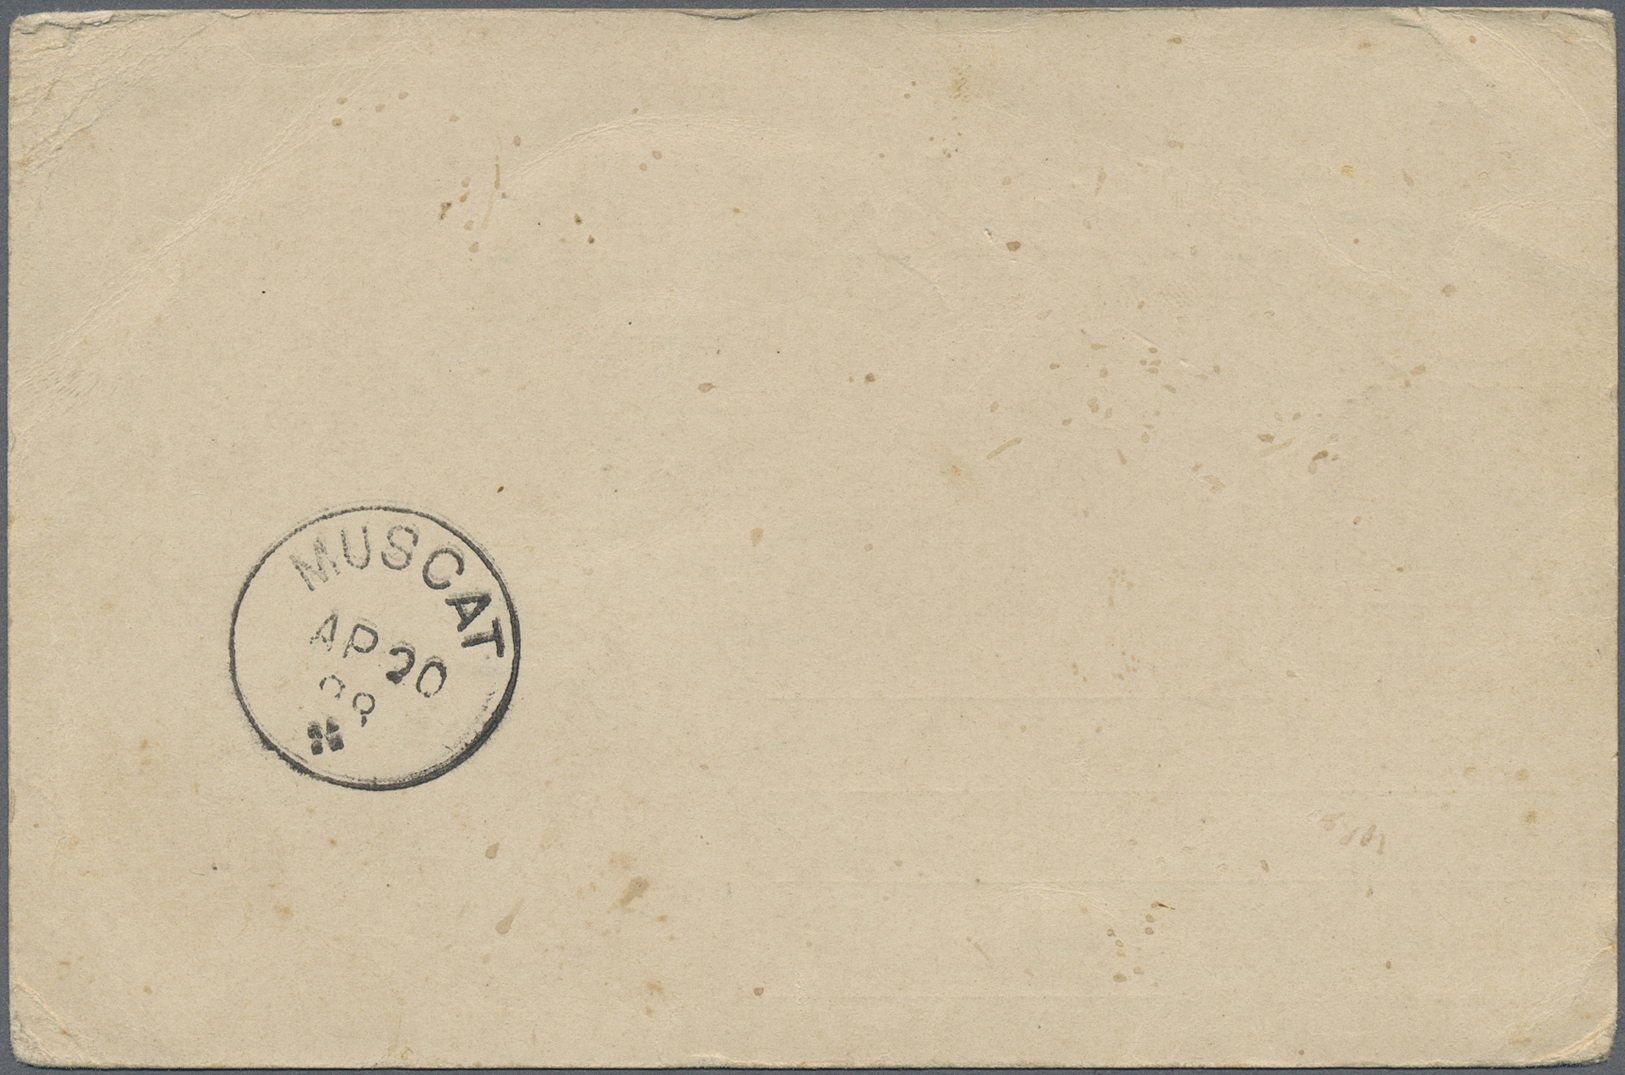 GA Oman: 1898, Postal Stationery Card Portuguese India 1/4 De Tanga Tied By Clear "SALIGAO ABR" Cds. Addressed To Muscat - Oman